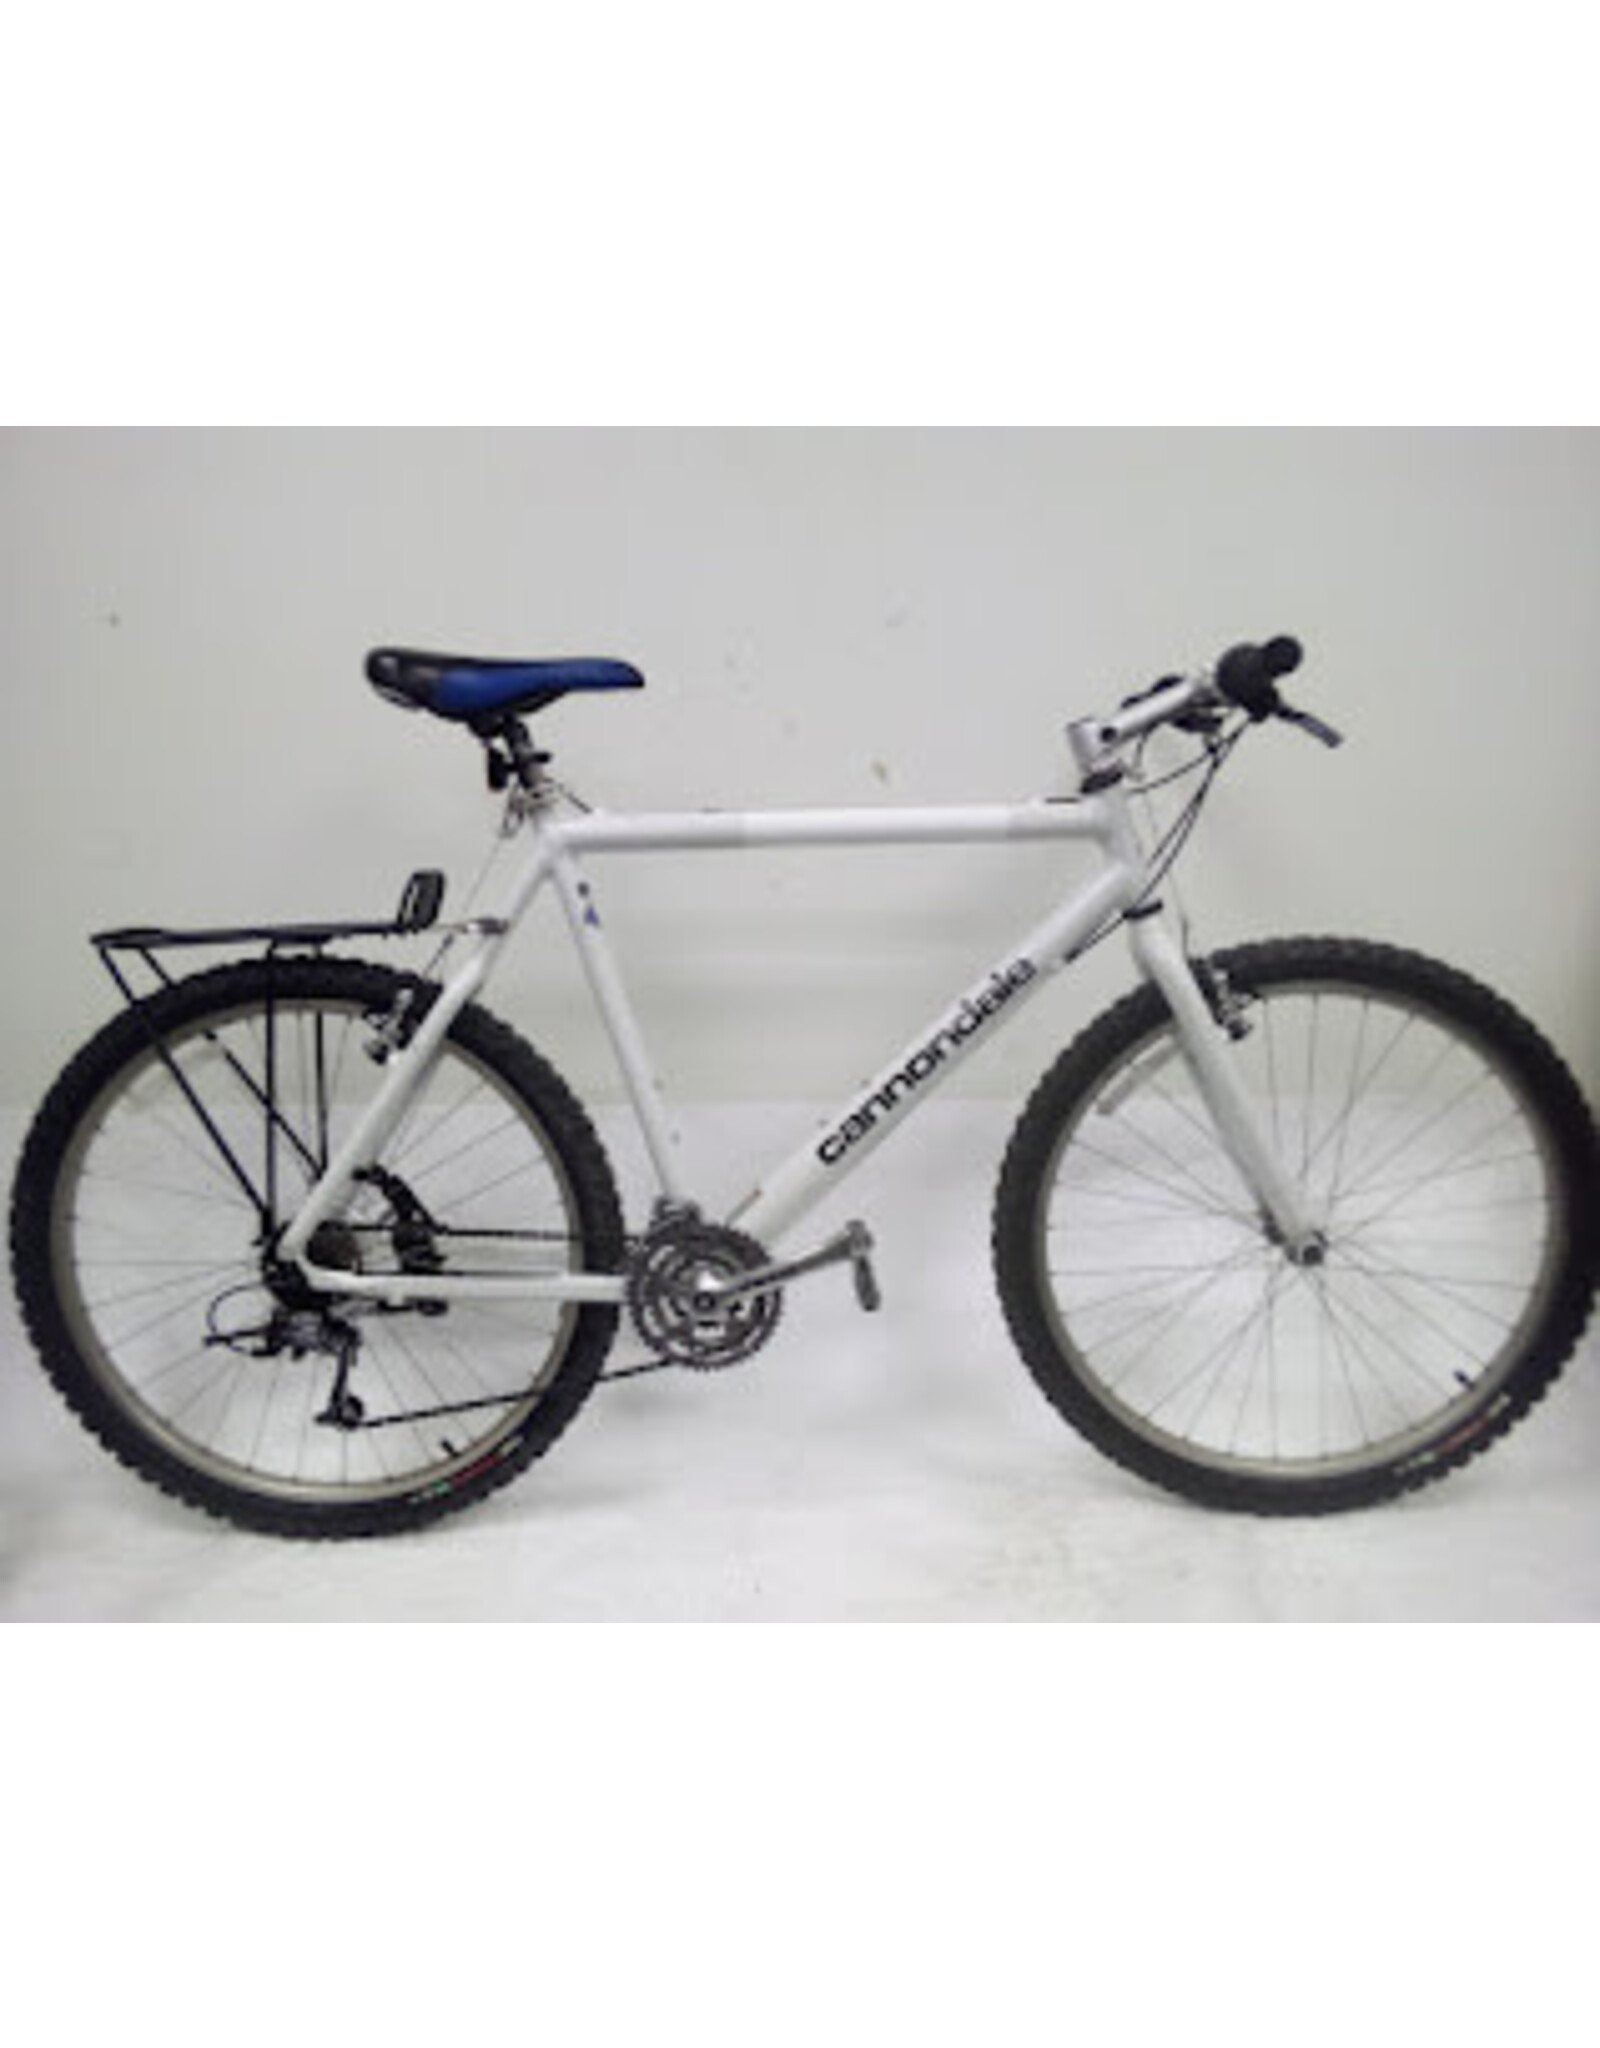 Cannondale Cannondale (decommissioned police bike)